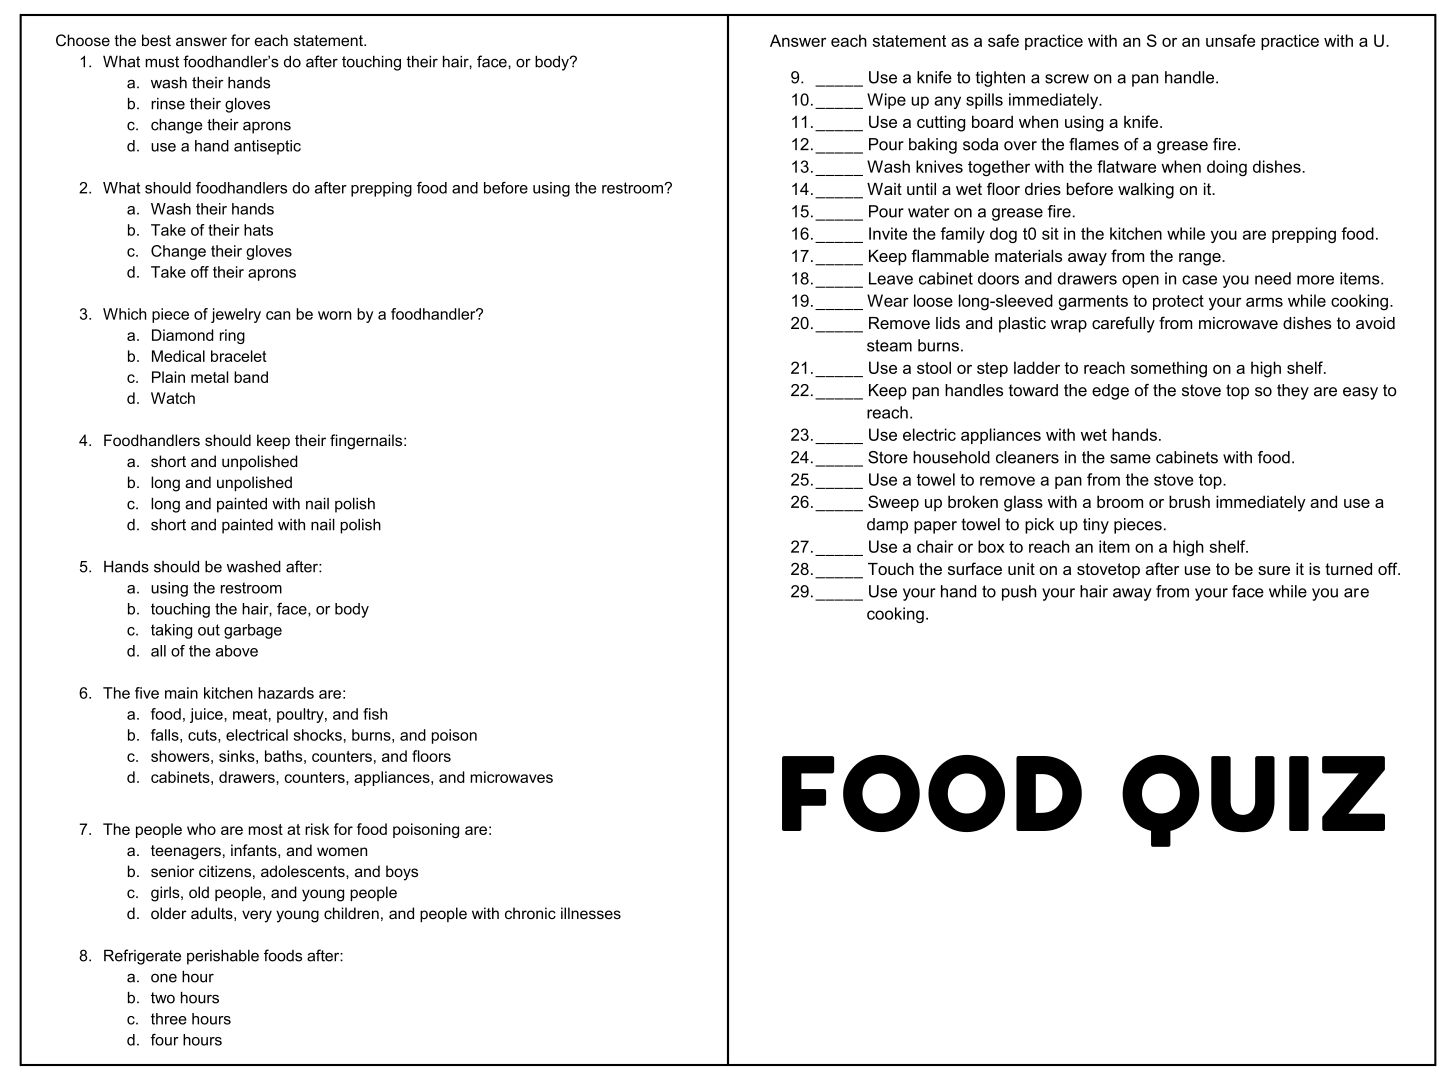 Free Printable Quizzes With Answers_69347